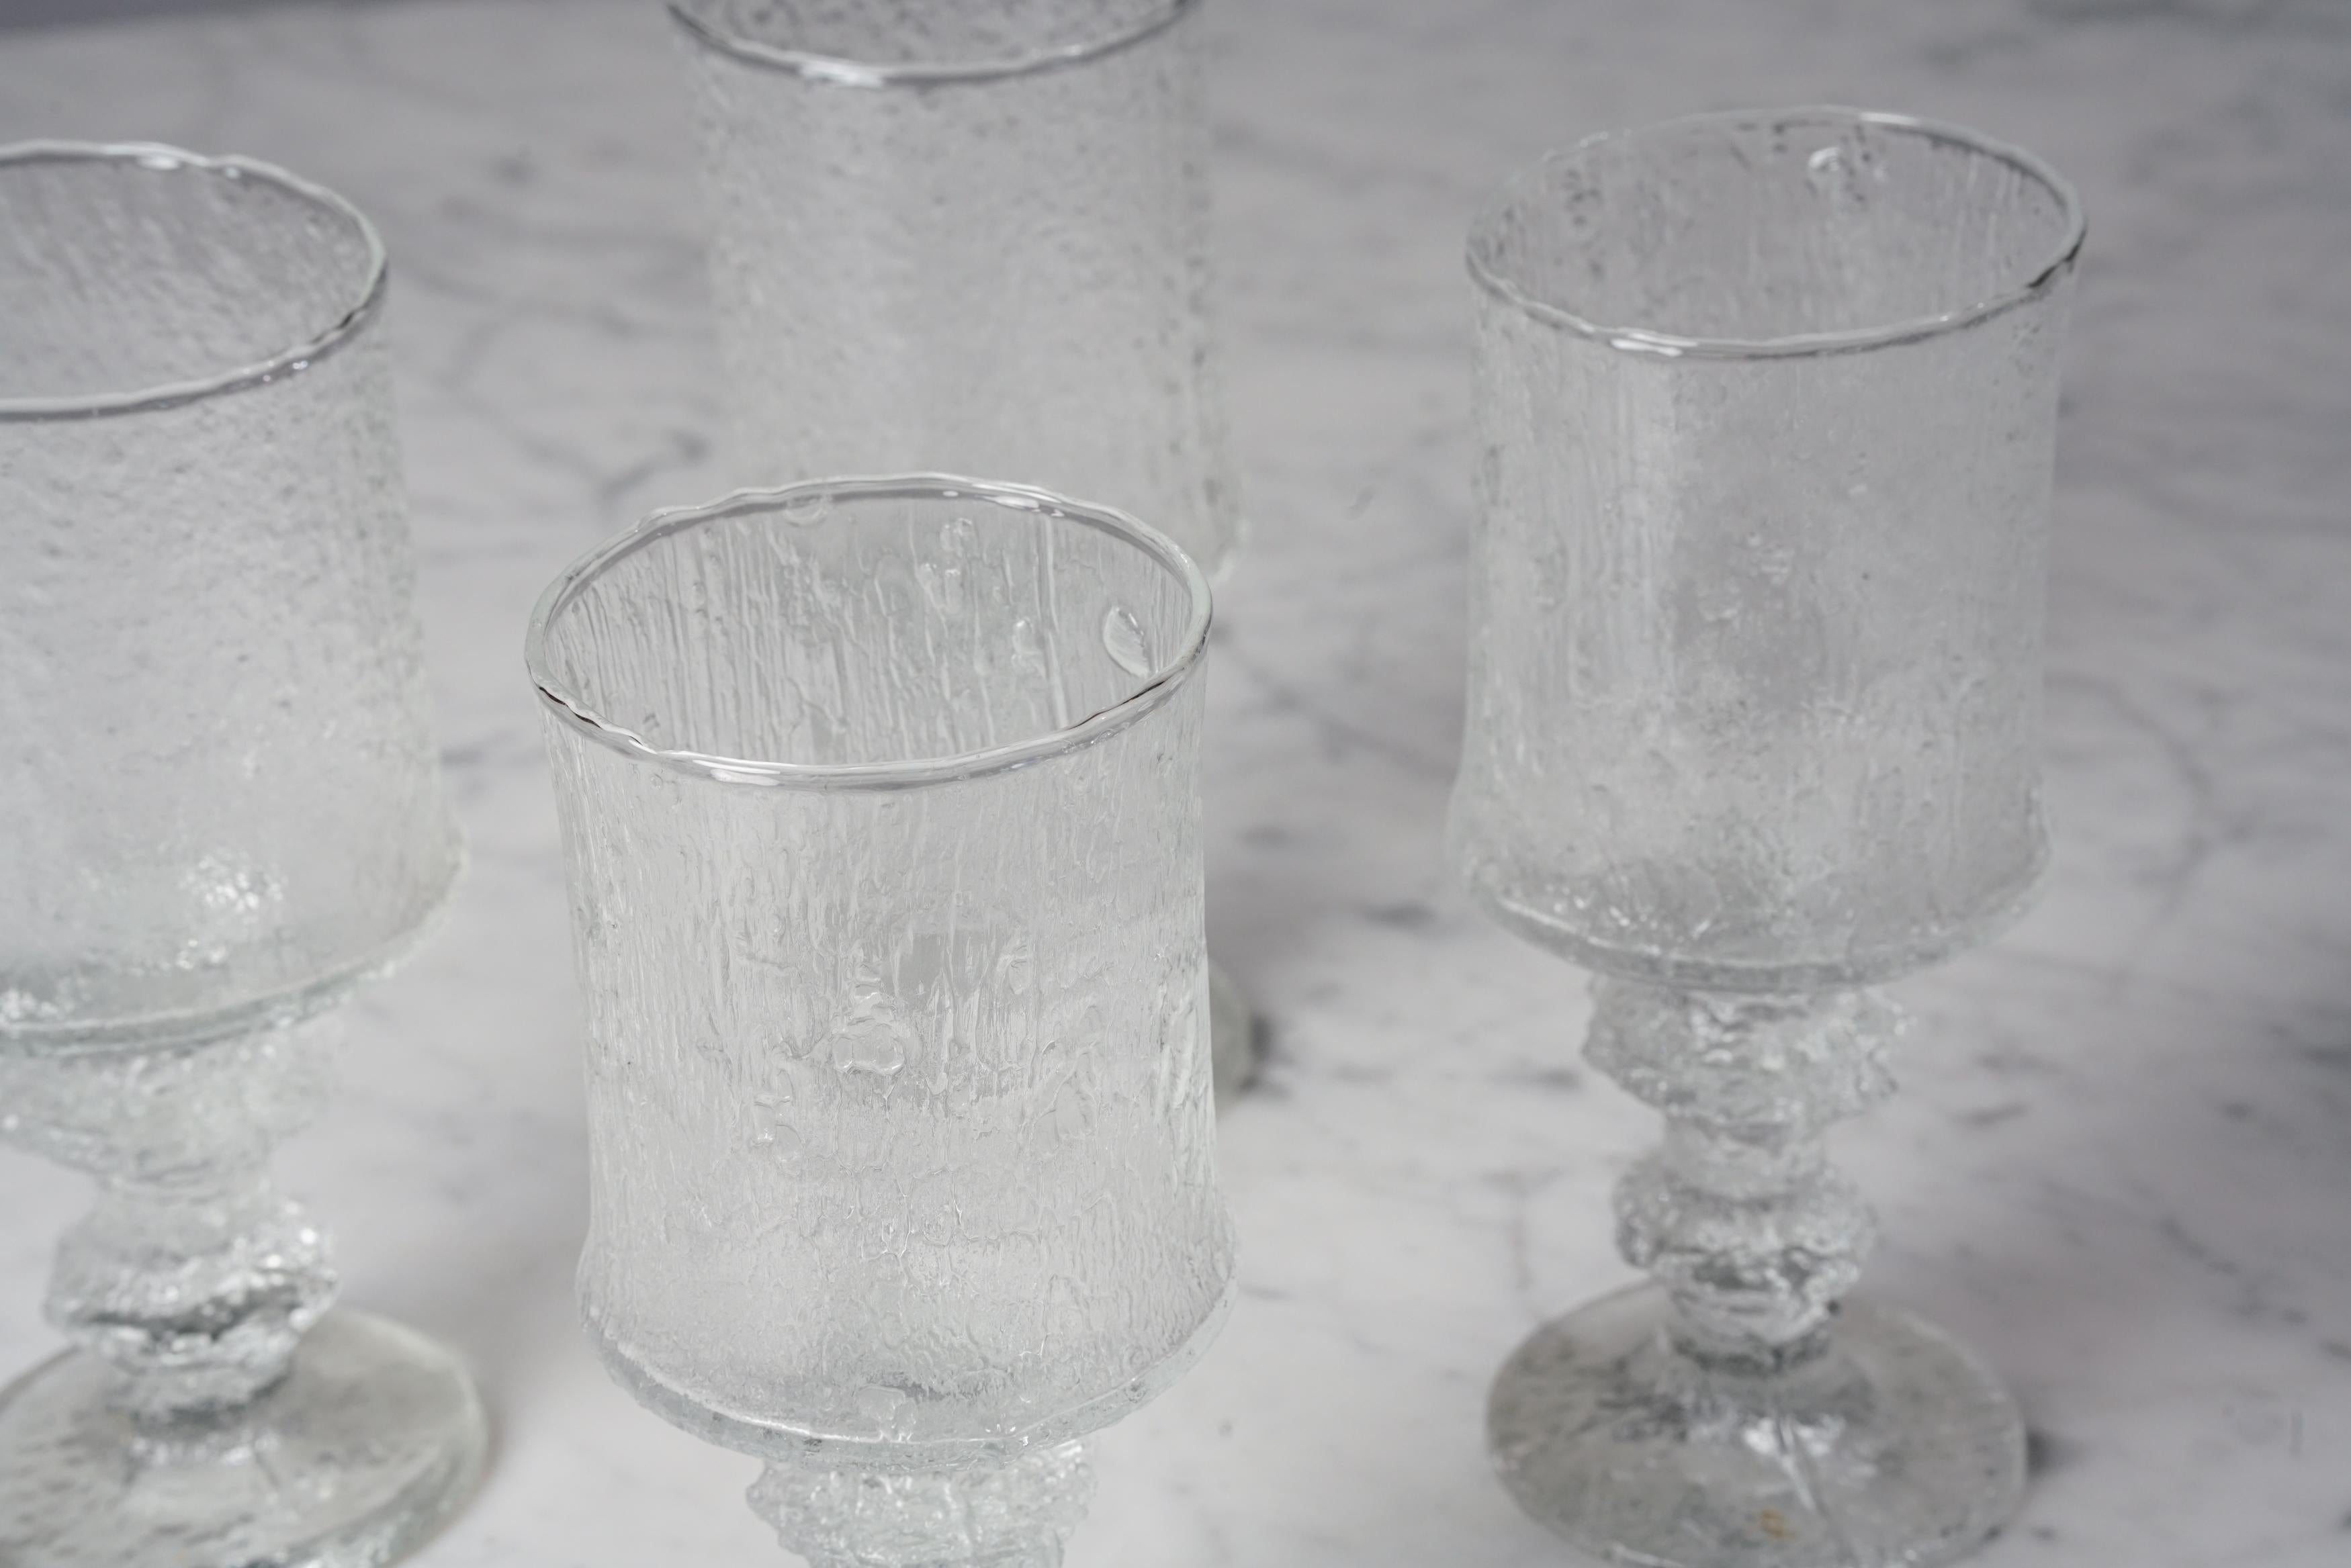 Scandinavian Modern model Festivo 2140 glasses (6 pieces) by Timo Sarpaneva For Iittala, 1970s, glass, good vintage condition, minor wear consistent with age and use. The glass pedestal is large and baroque in size, with a rich and rosy surface. It